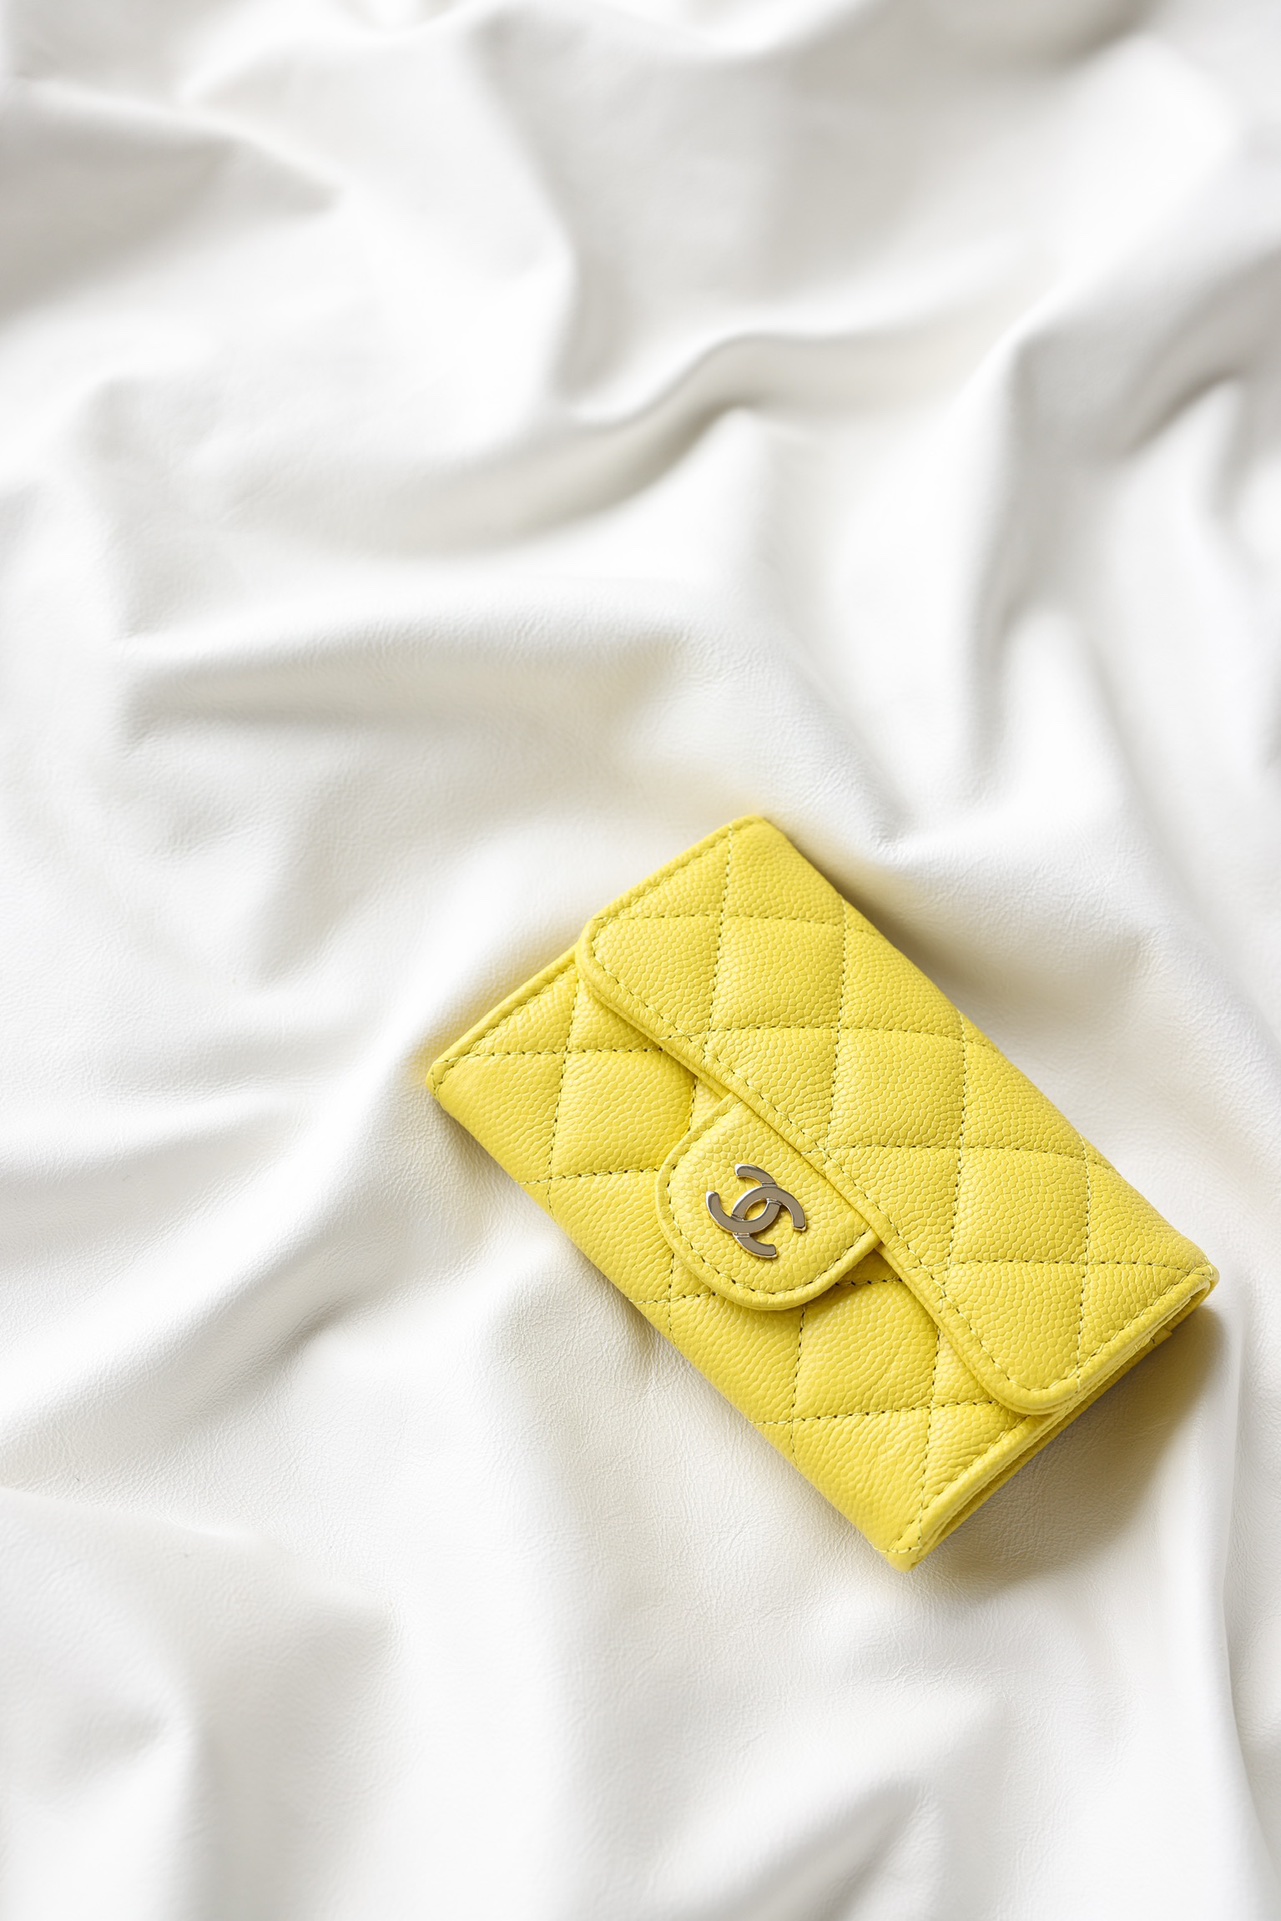 Chanel Classic Flap Bag Wallet Card pack Yellow All Steel